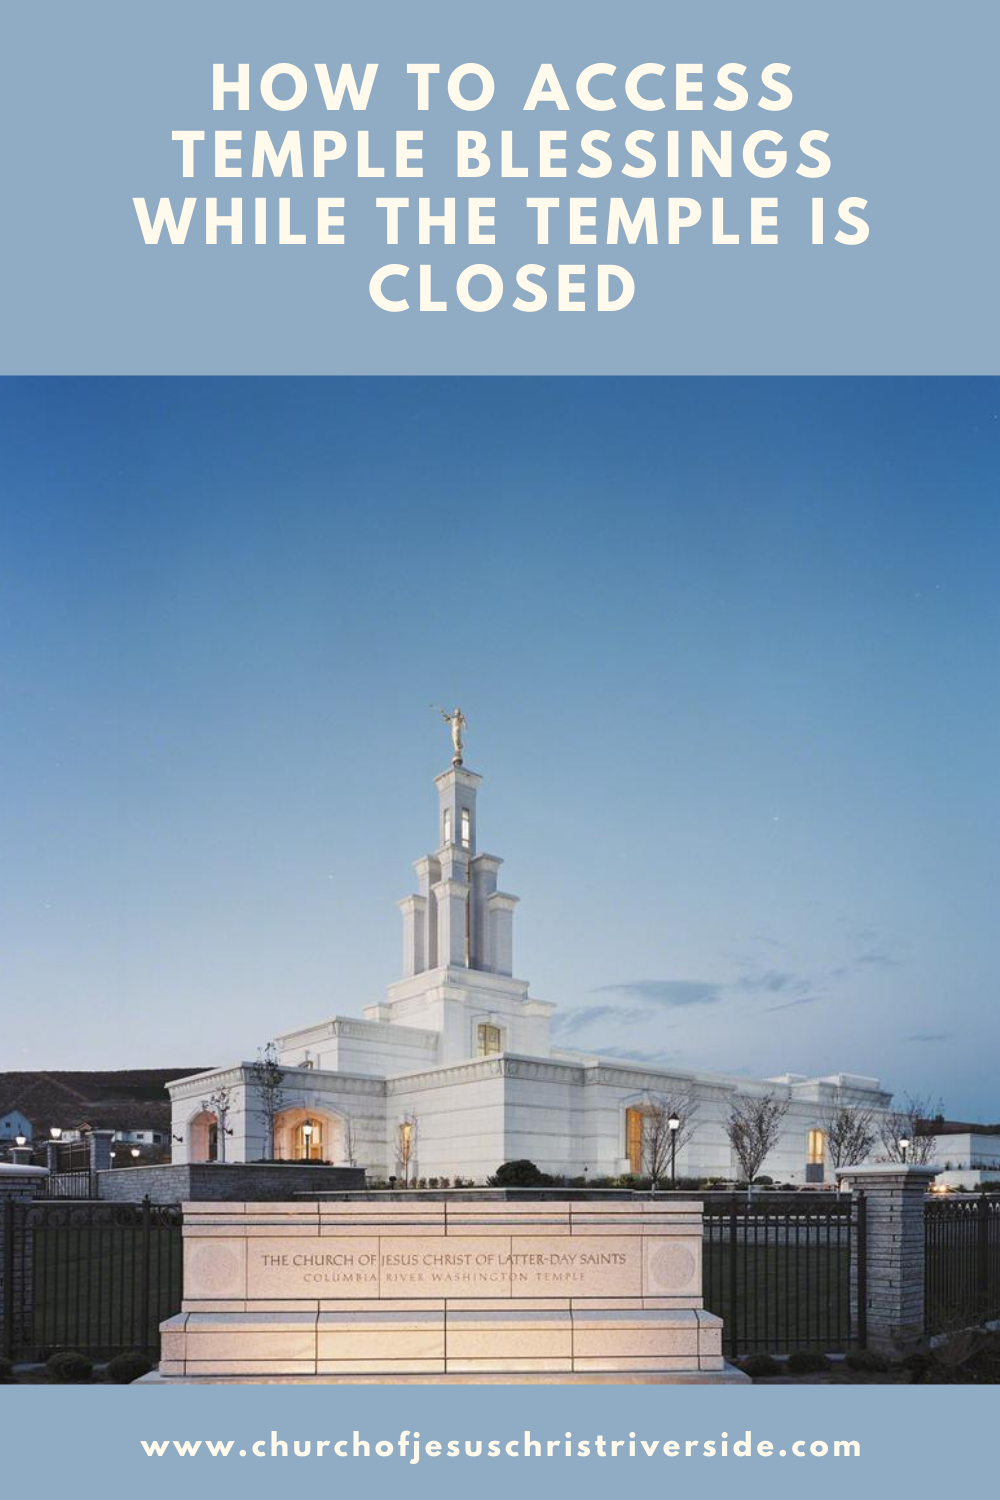 How to access temple blessings while the temple is closed